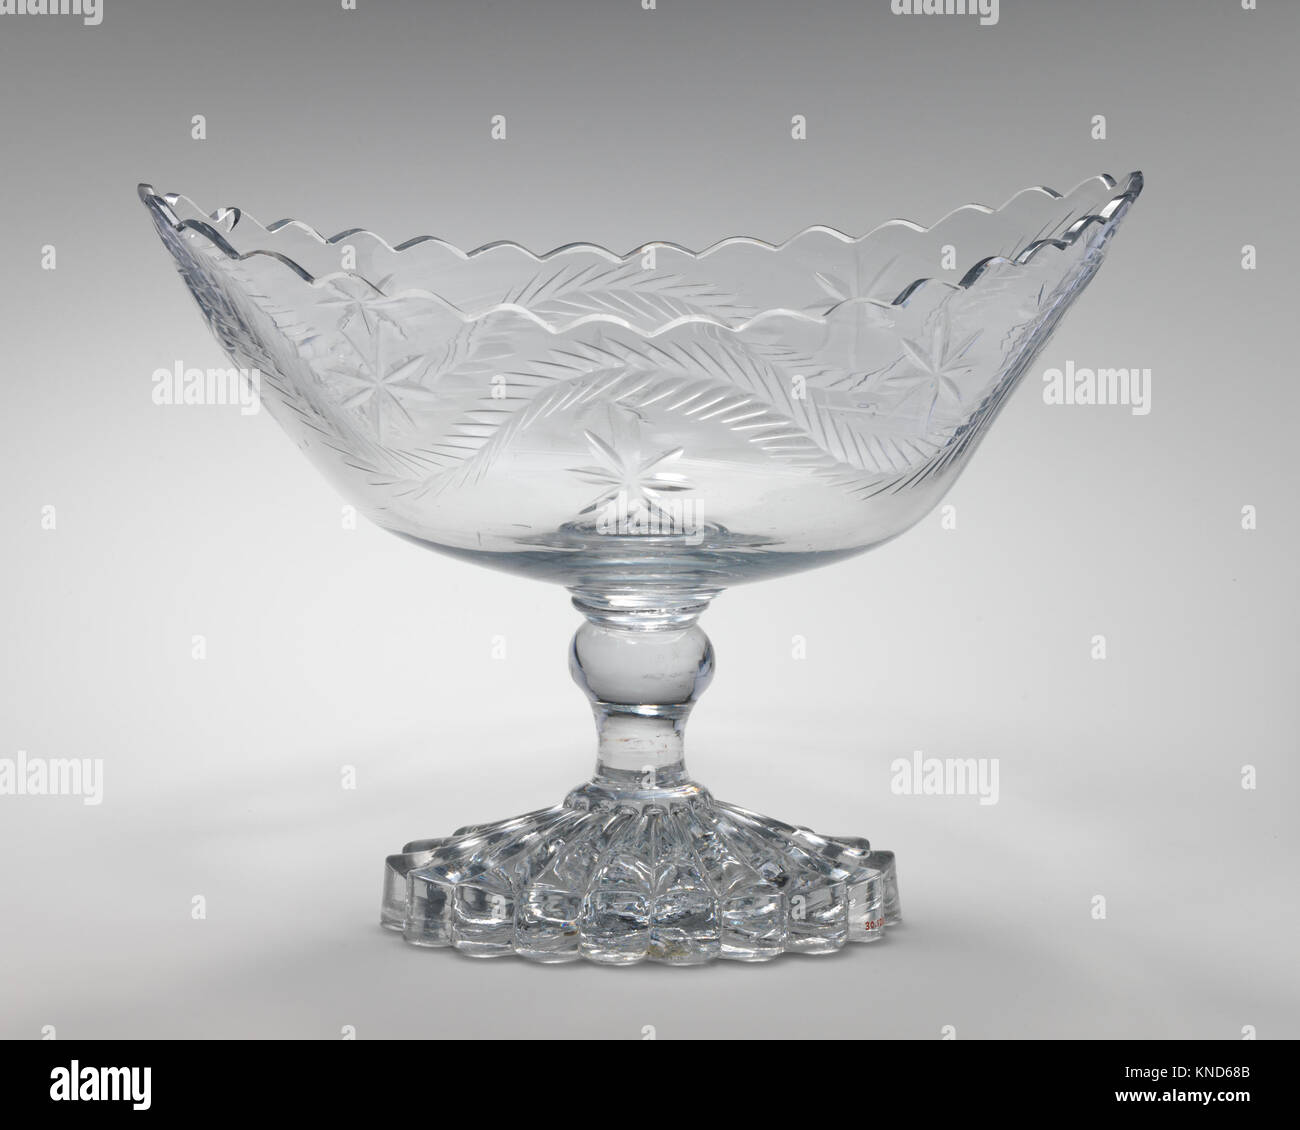 Fruit bowl MET DP-1618-032 196652 probably Irish, Fruit bowl, late 18th?early 19th century, Glass, H. 9 3/4 in.  (24.8 cm); L. 13 1/8 in. (33.3 cm.). The Metropolitan Museum of Art, New York. The Sylmaris Collection, Gift of George Coe Graves, 1930 (30.120.249) Stock Photo